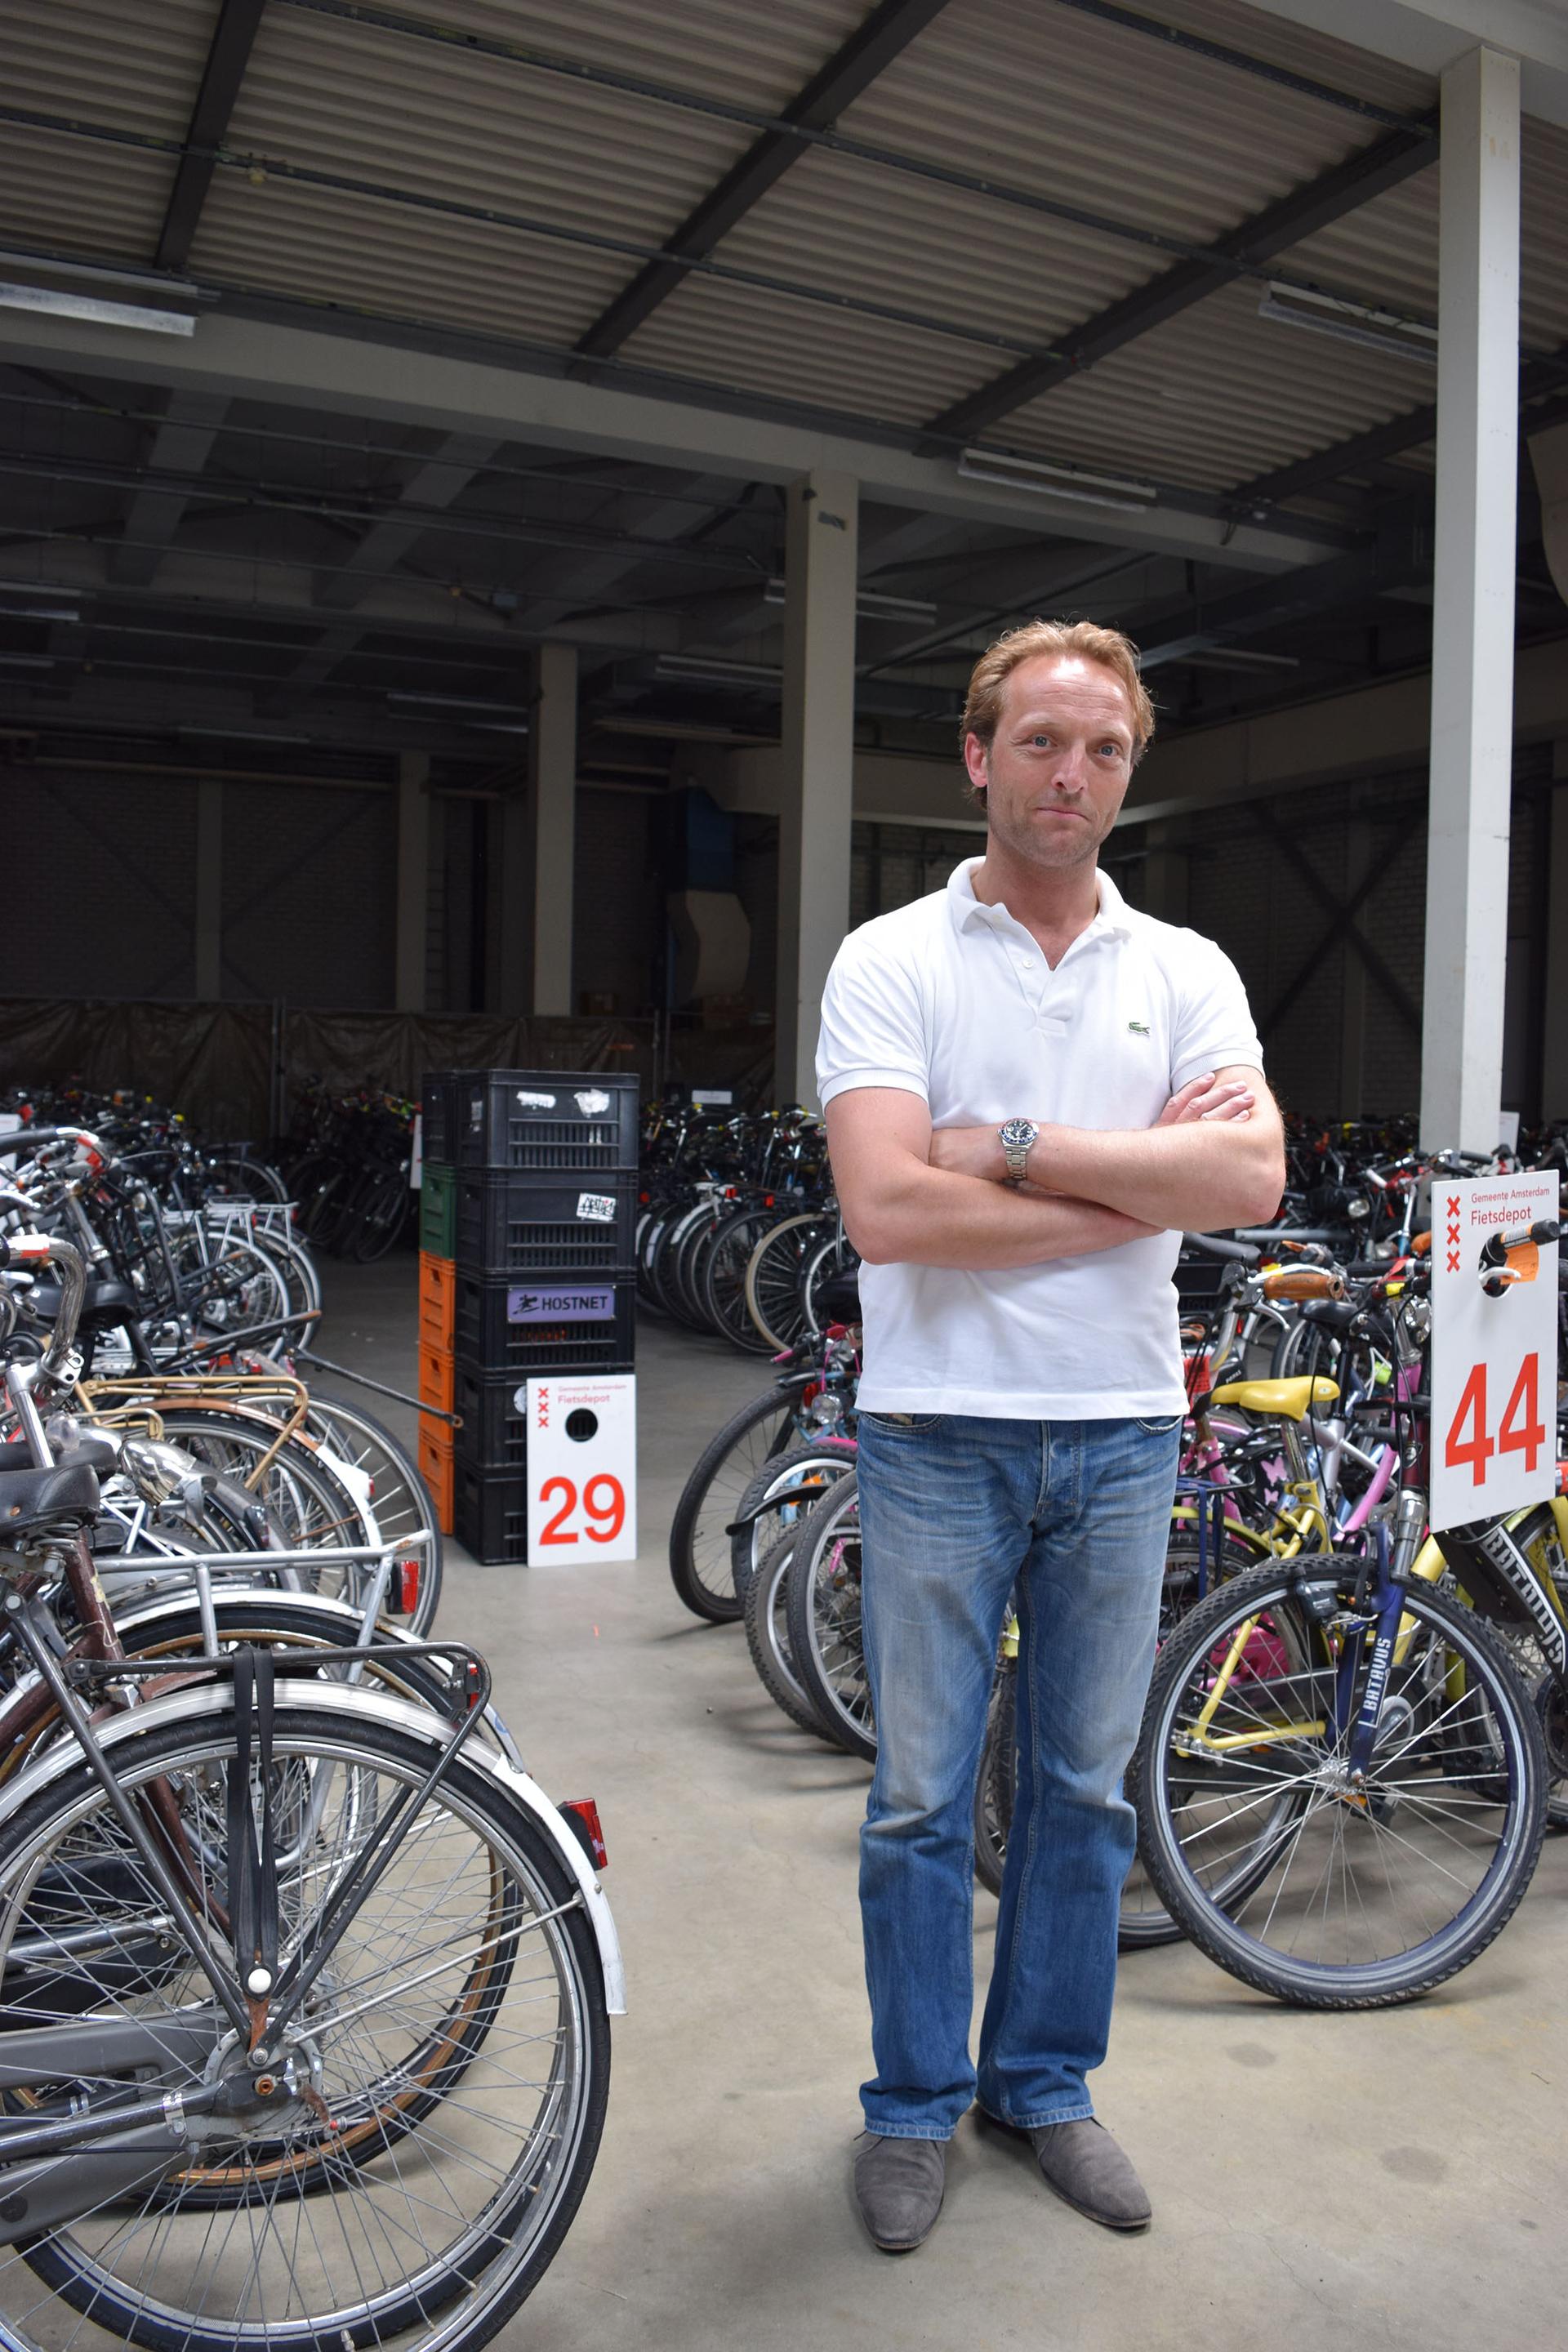 Pieter Berkhout, the man in charge at the Bike Depot